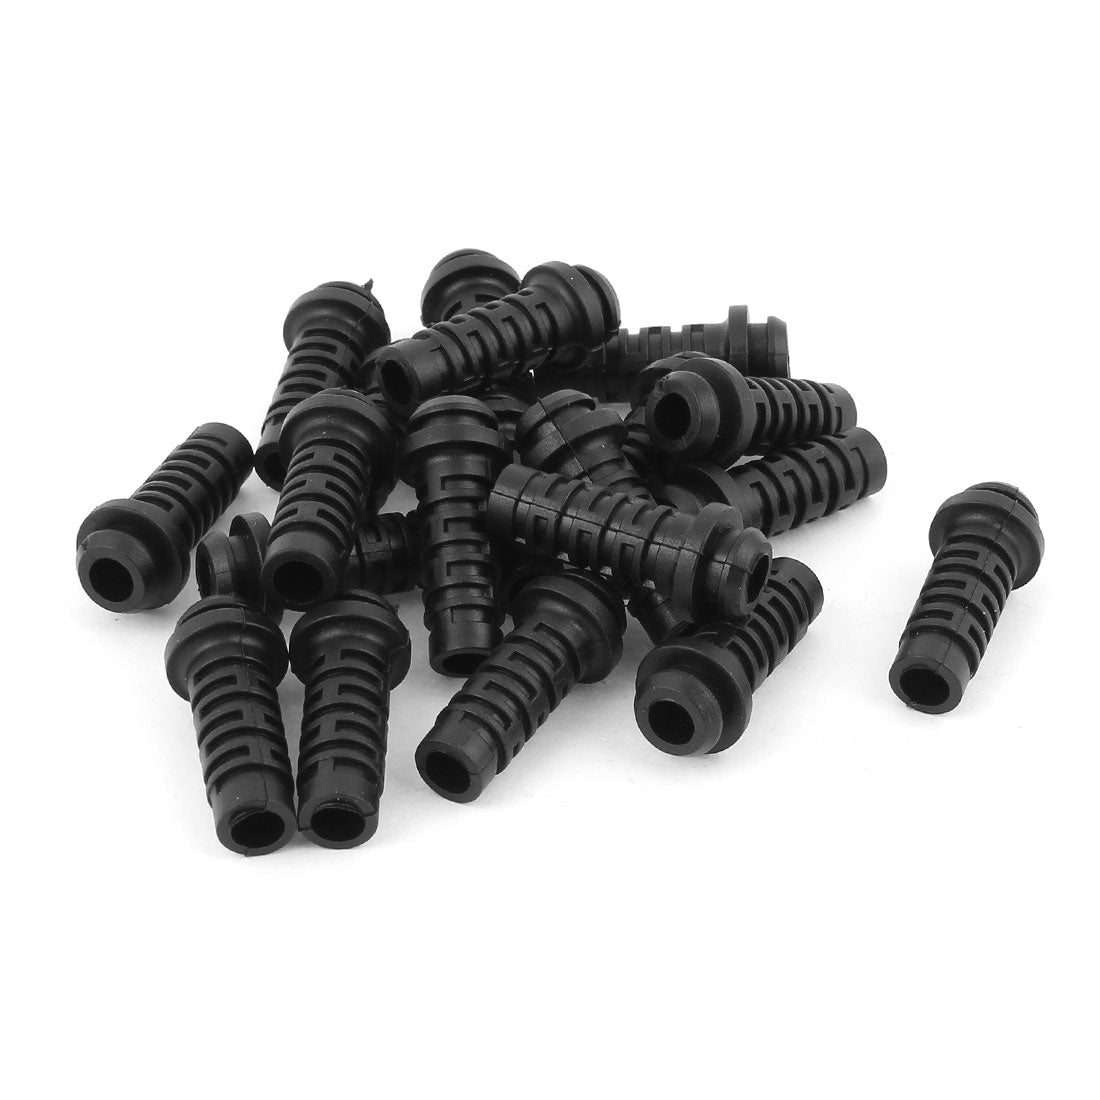 uxcell Uxcell 20pcs 27x8x5mm Rubber Strain Re-lief Cord Boot Protector Wire Cable Sleeve Hose for Cellphone Charger